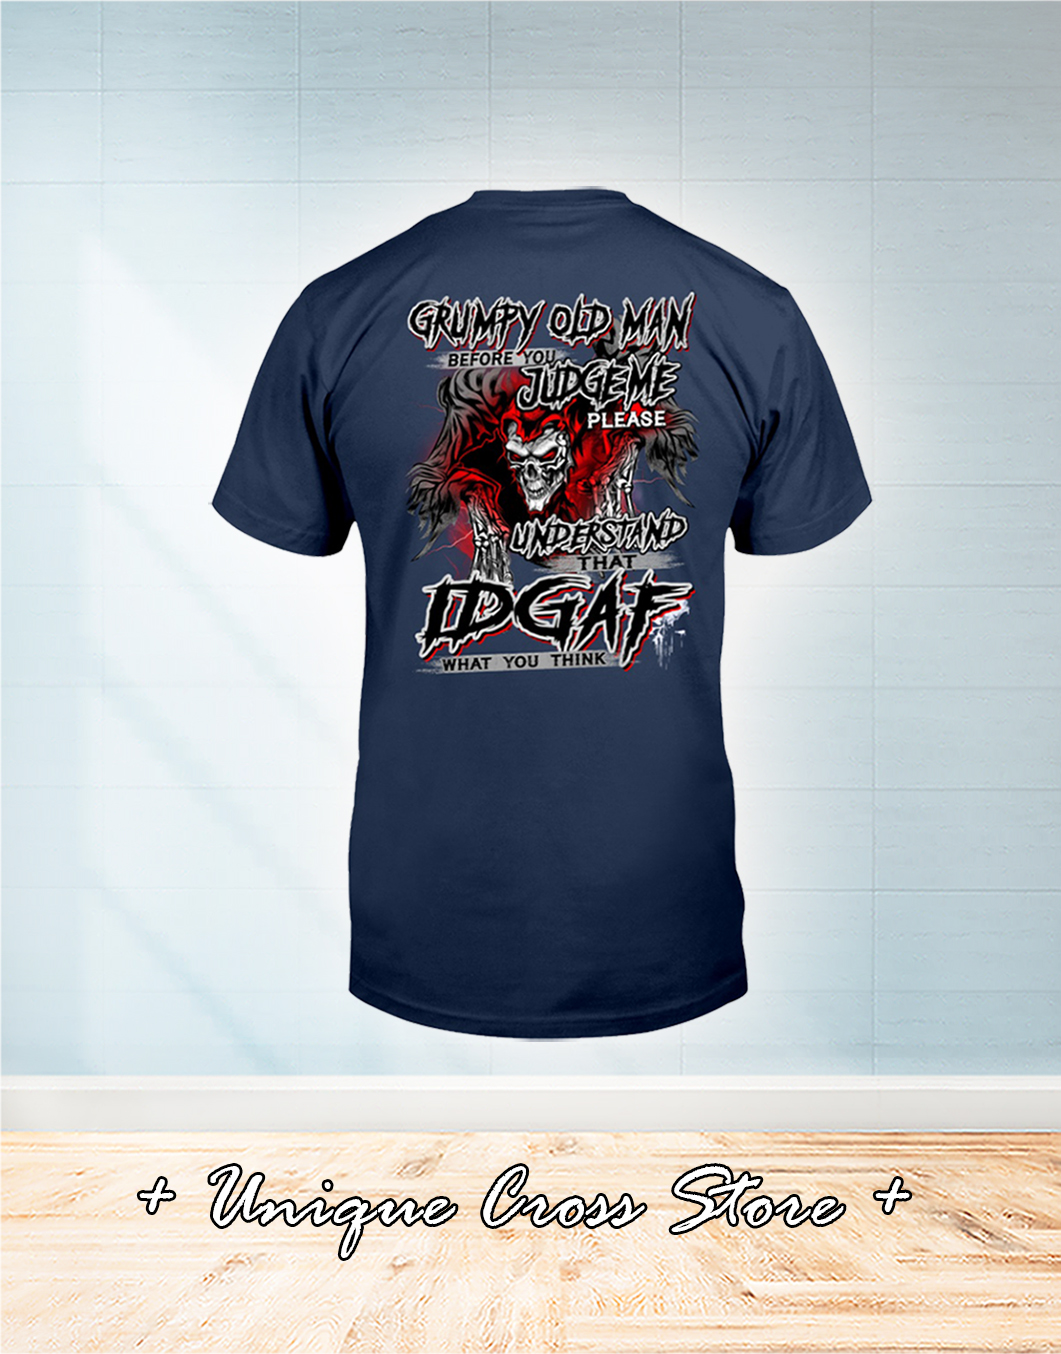 Skull Grumpy Old Man Before You Judge Me Please Understand That Idgaf What You Think Shirt